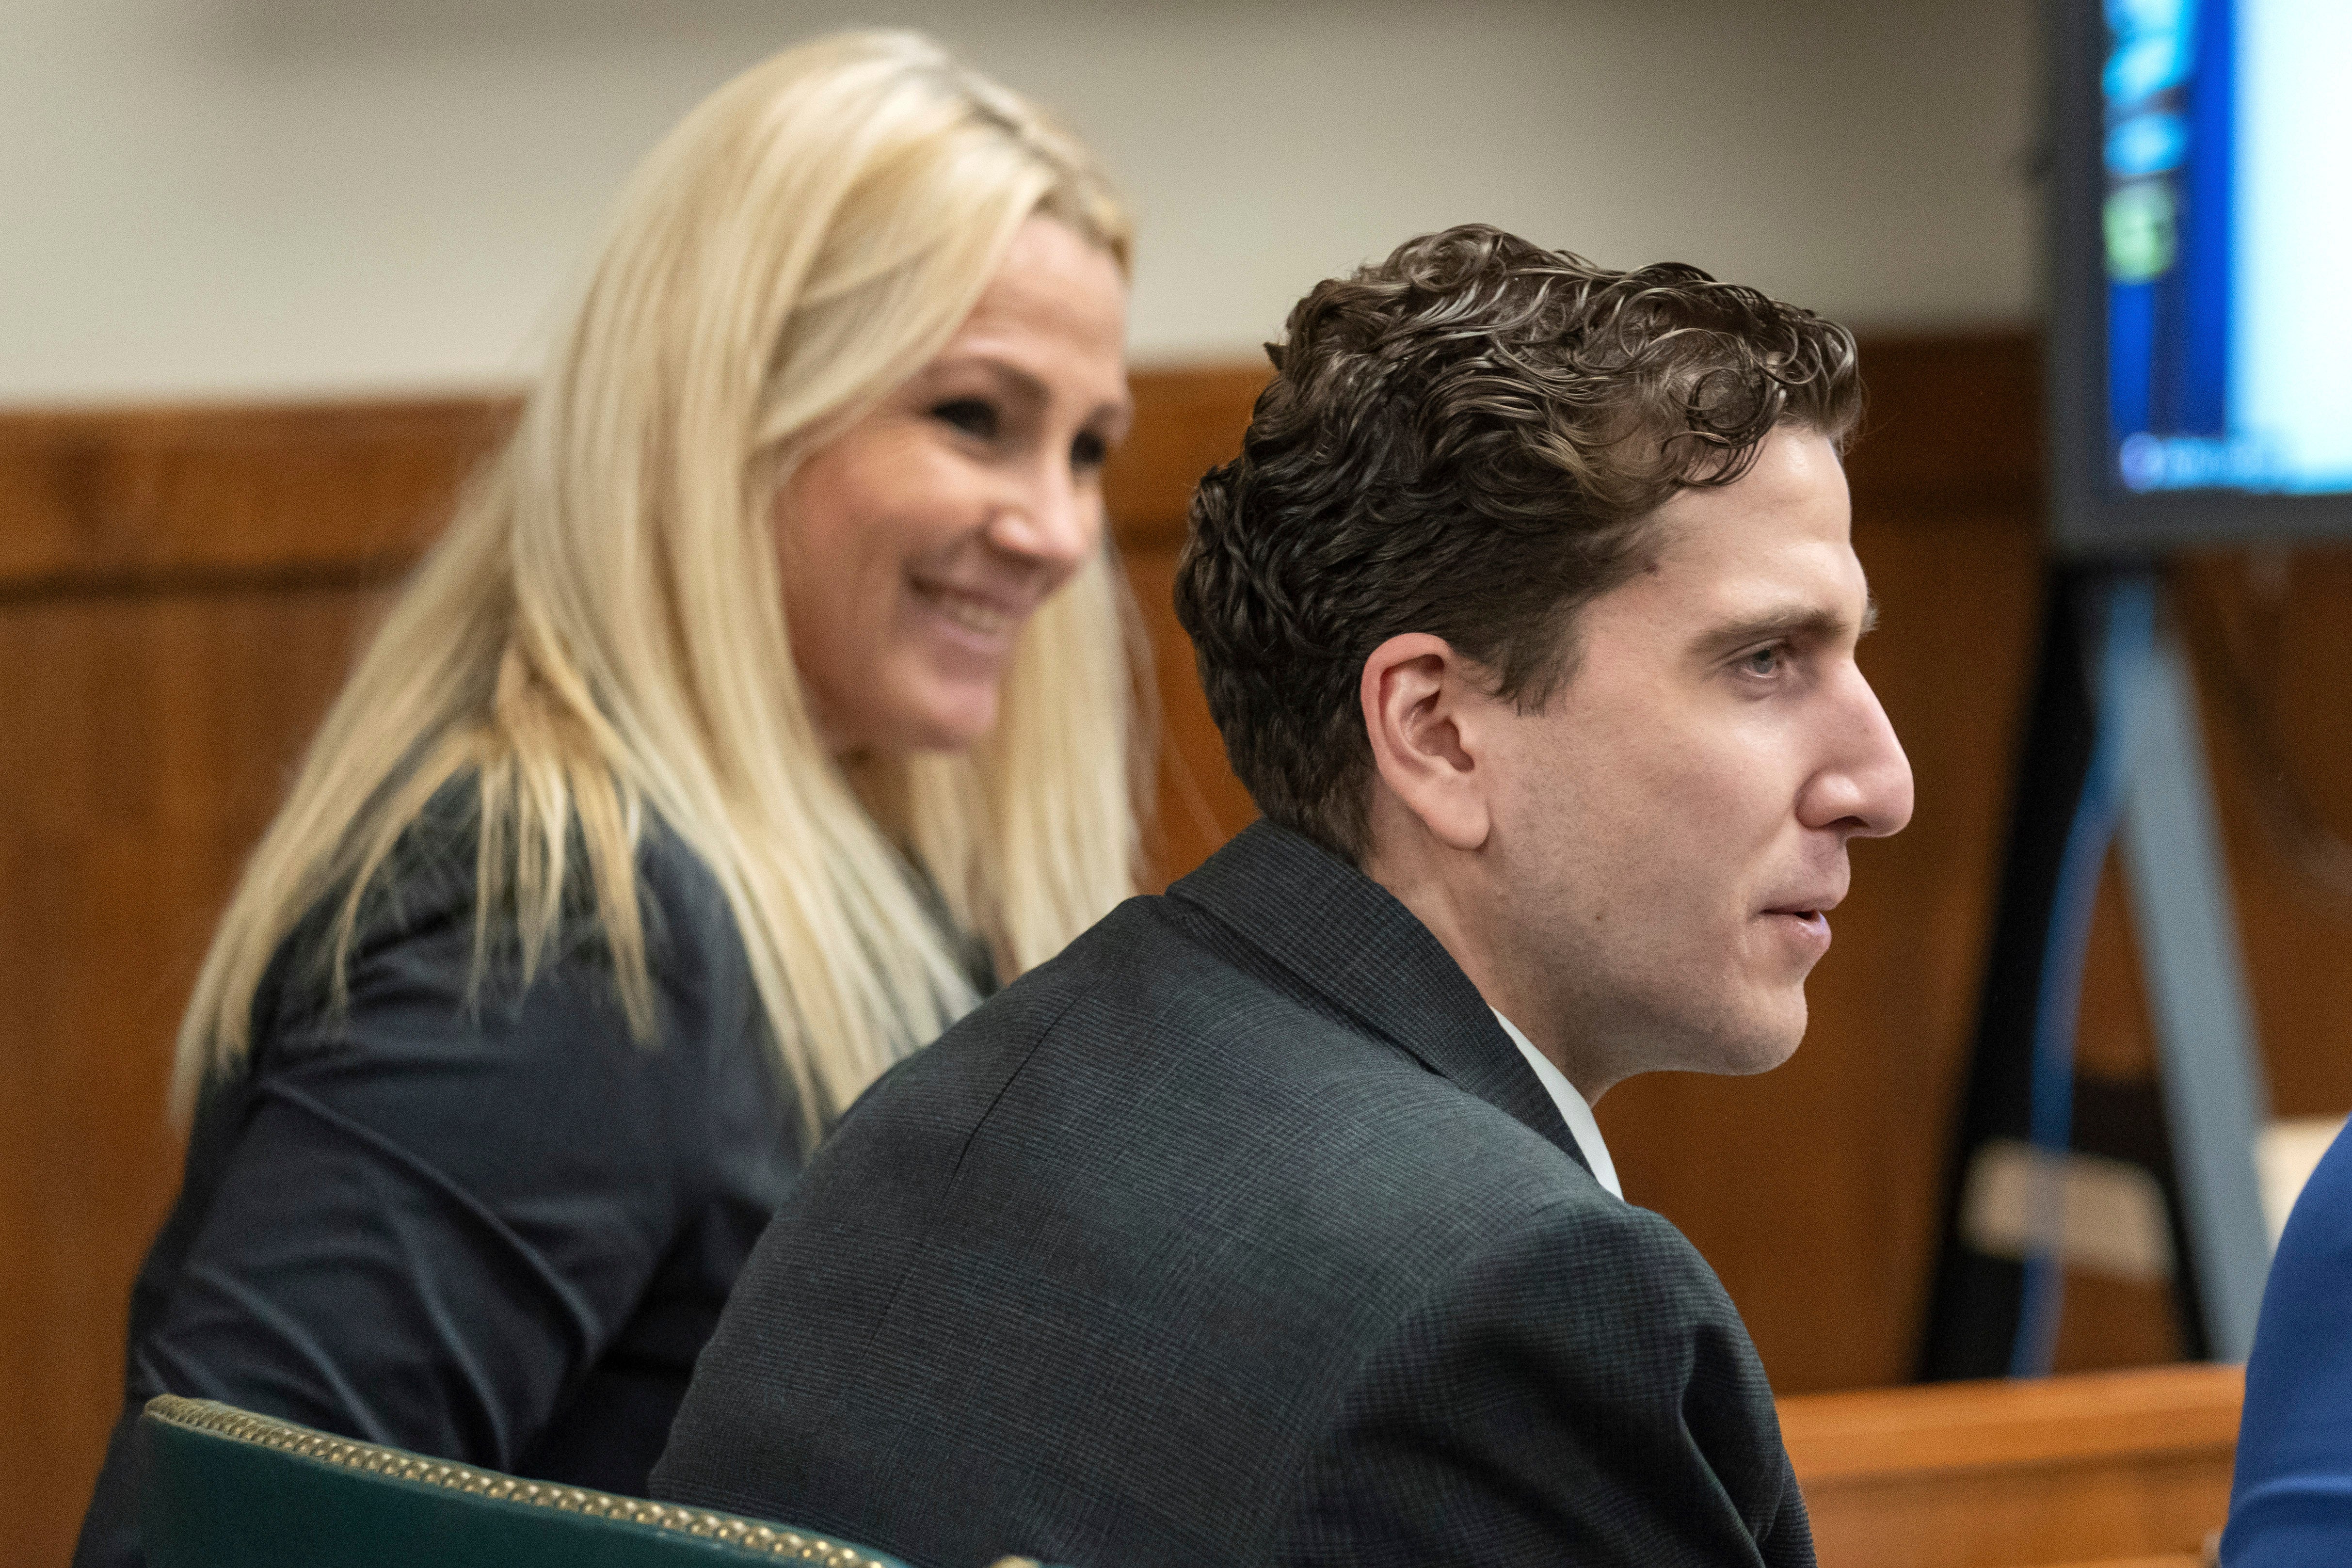 Bryan Kohberger, who is accused of killing four University of Idaho students in November 2022, sits with Anne Taylor, left, one of his attorneys in a court hearing